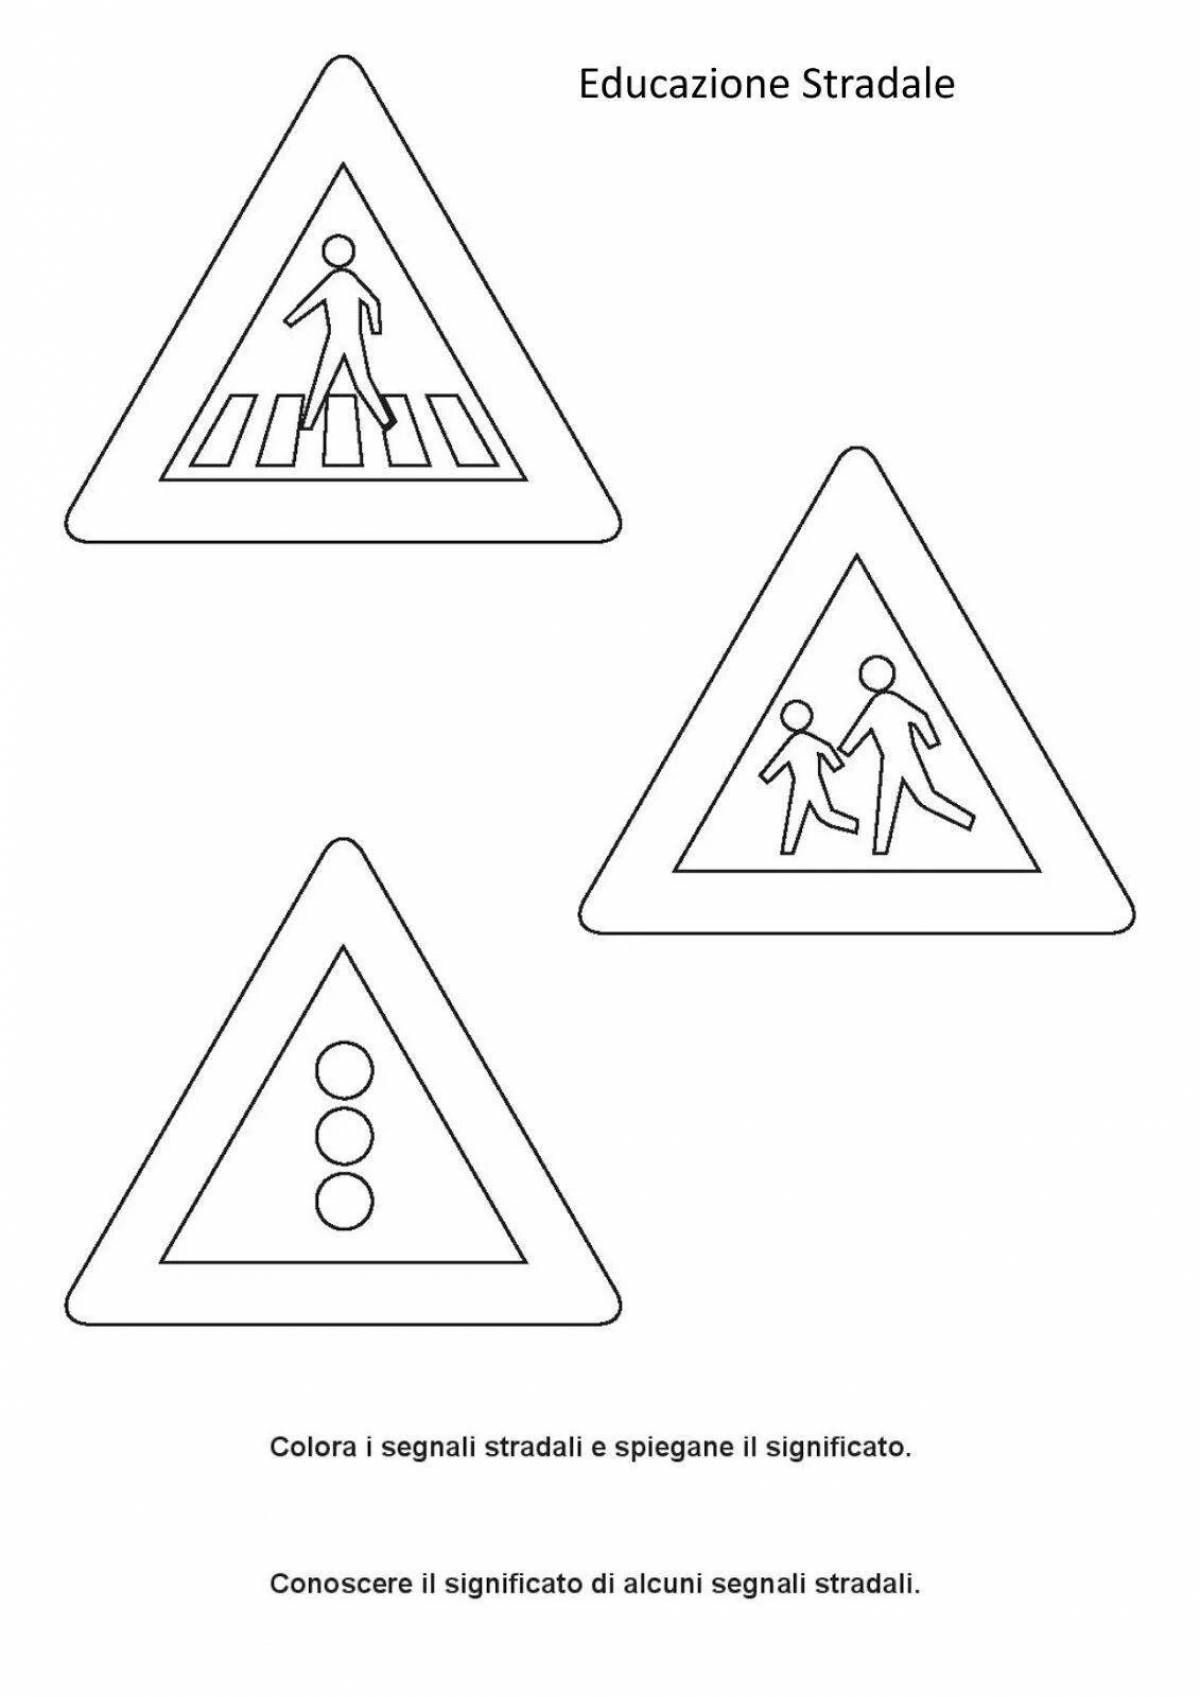 Interactive traffic sign coloring book for preschoolers